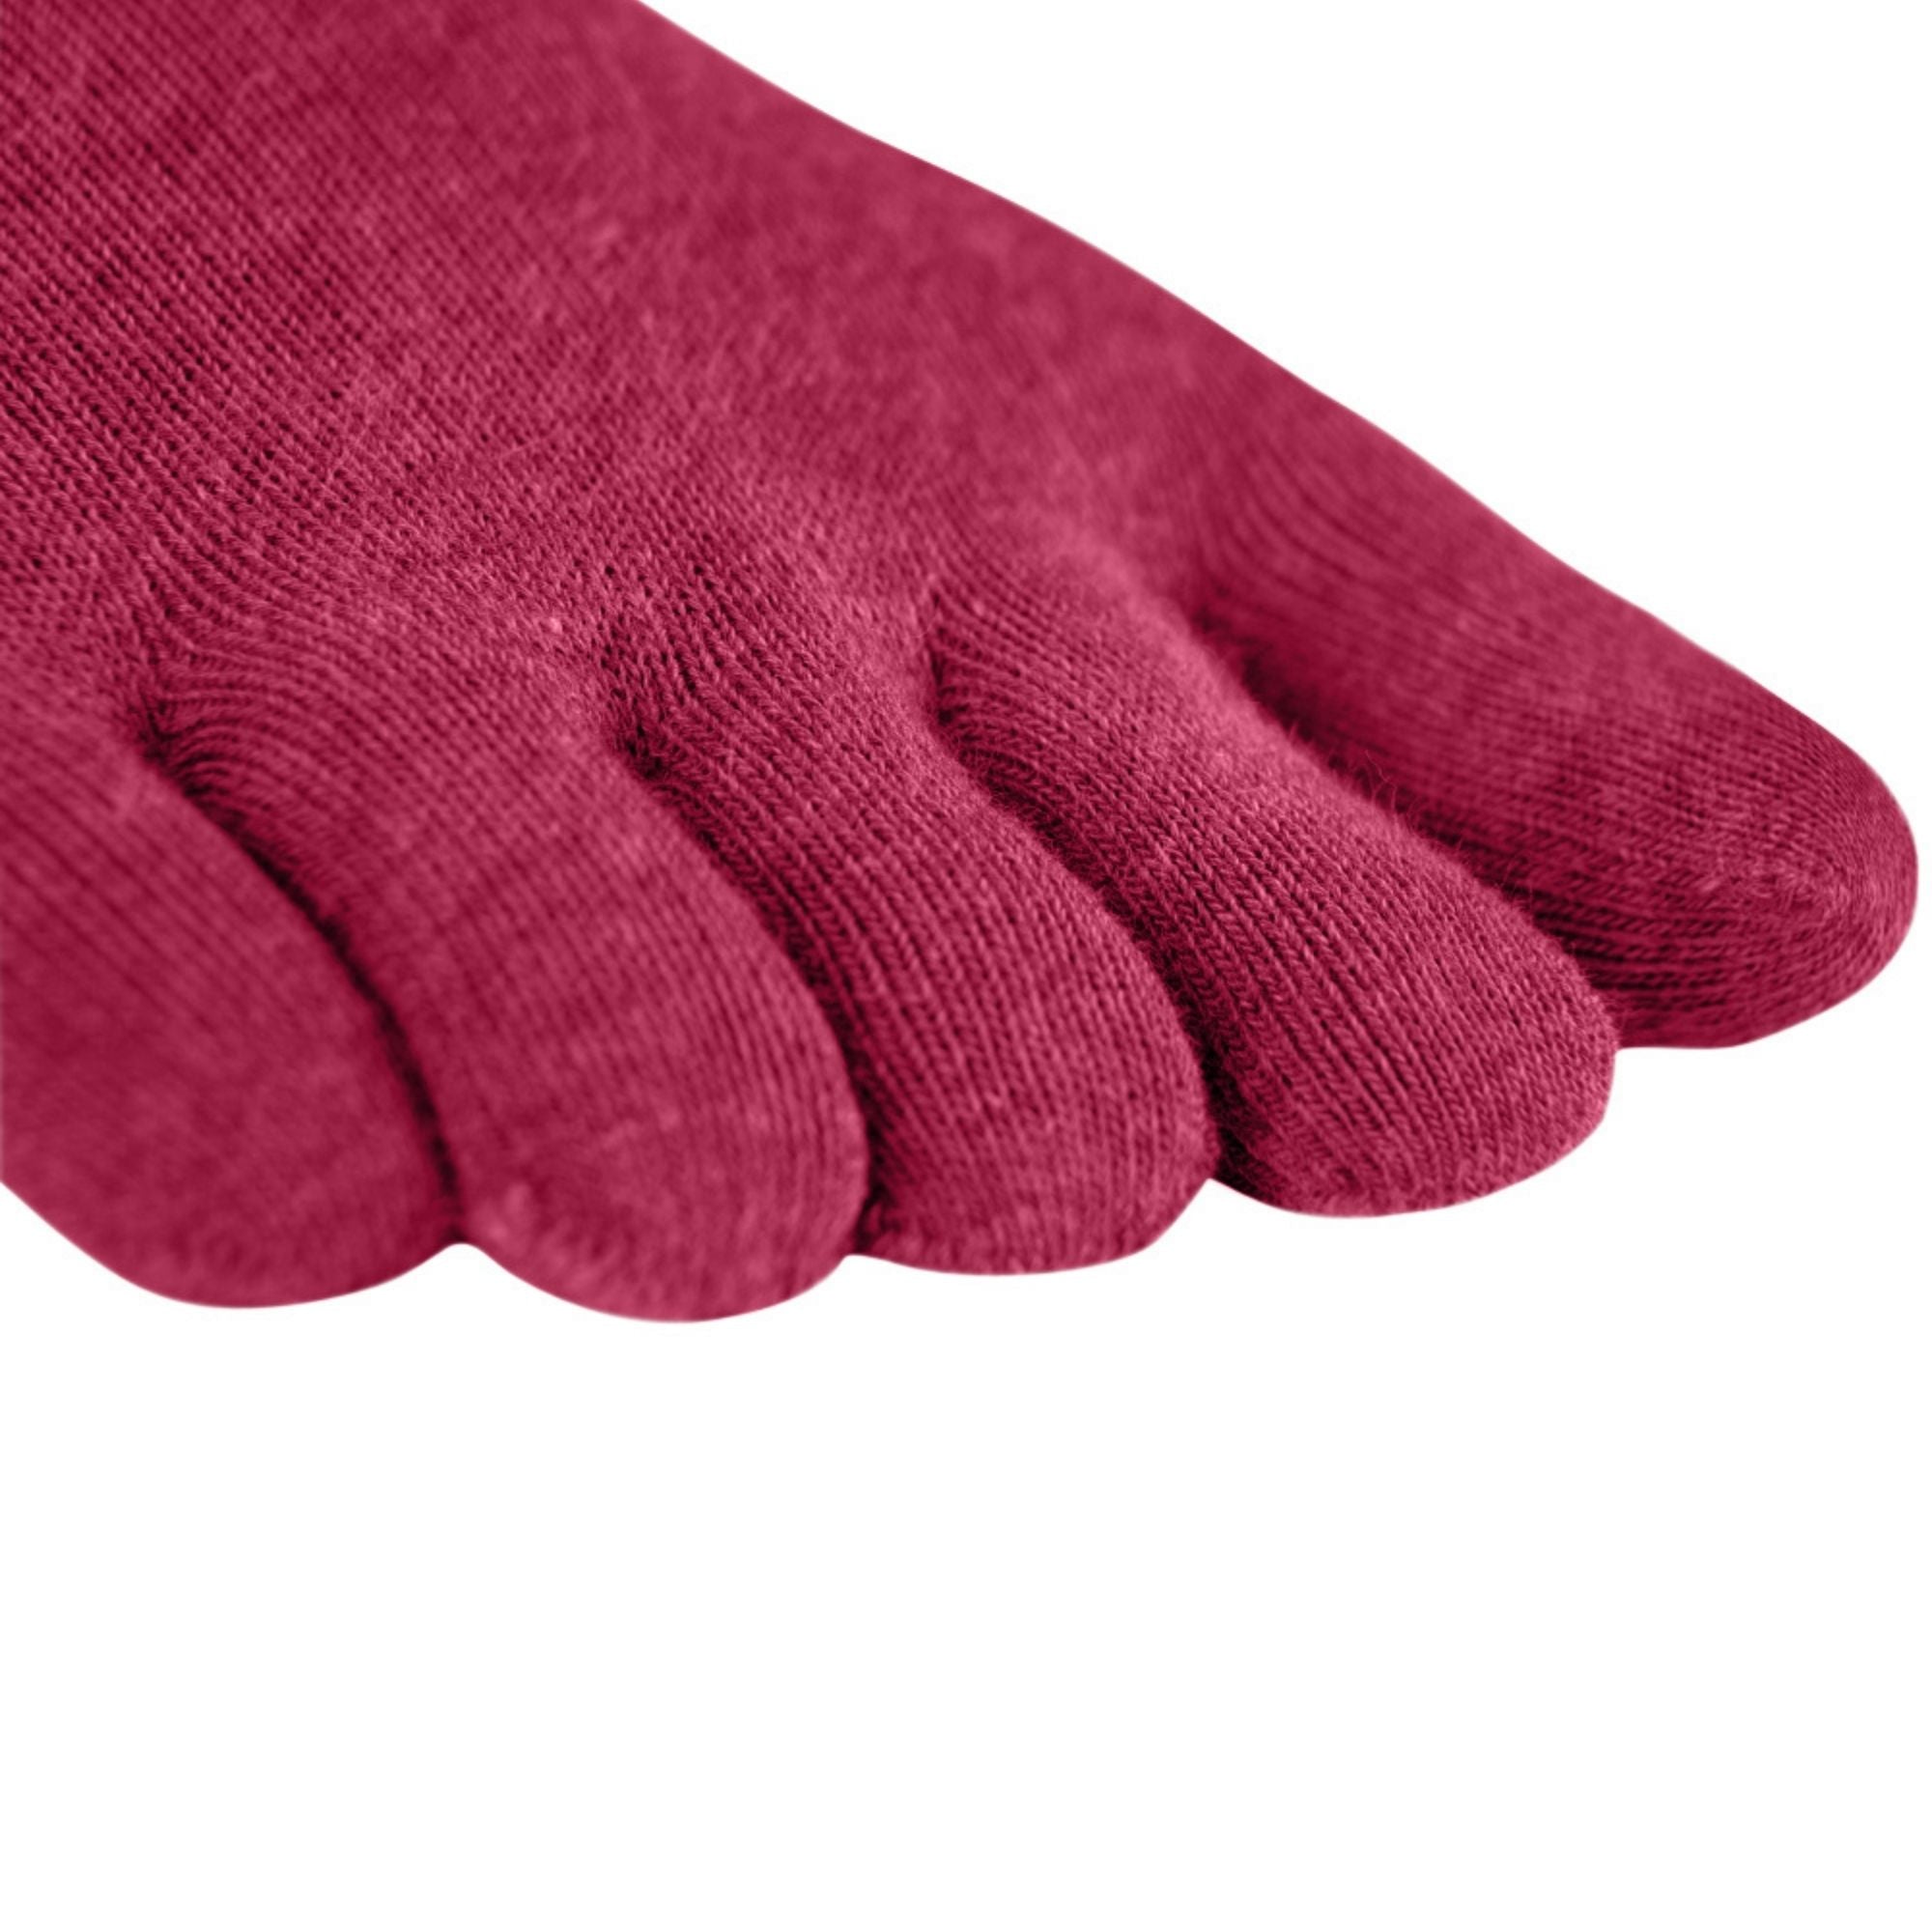 3-pack sports toe socks Coolmax and cotton from Knitido in marsala red